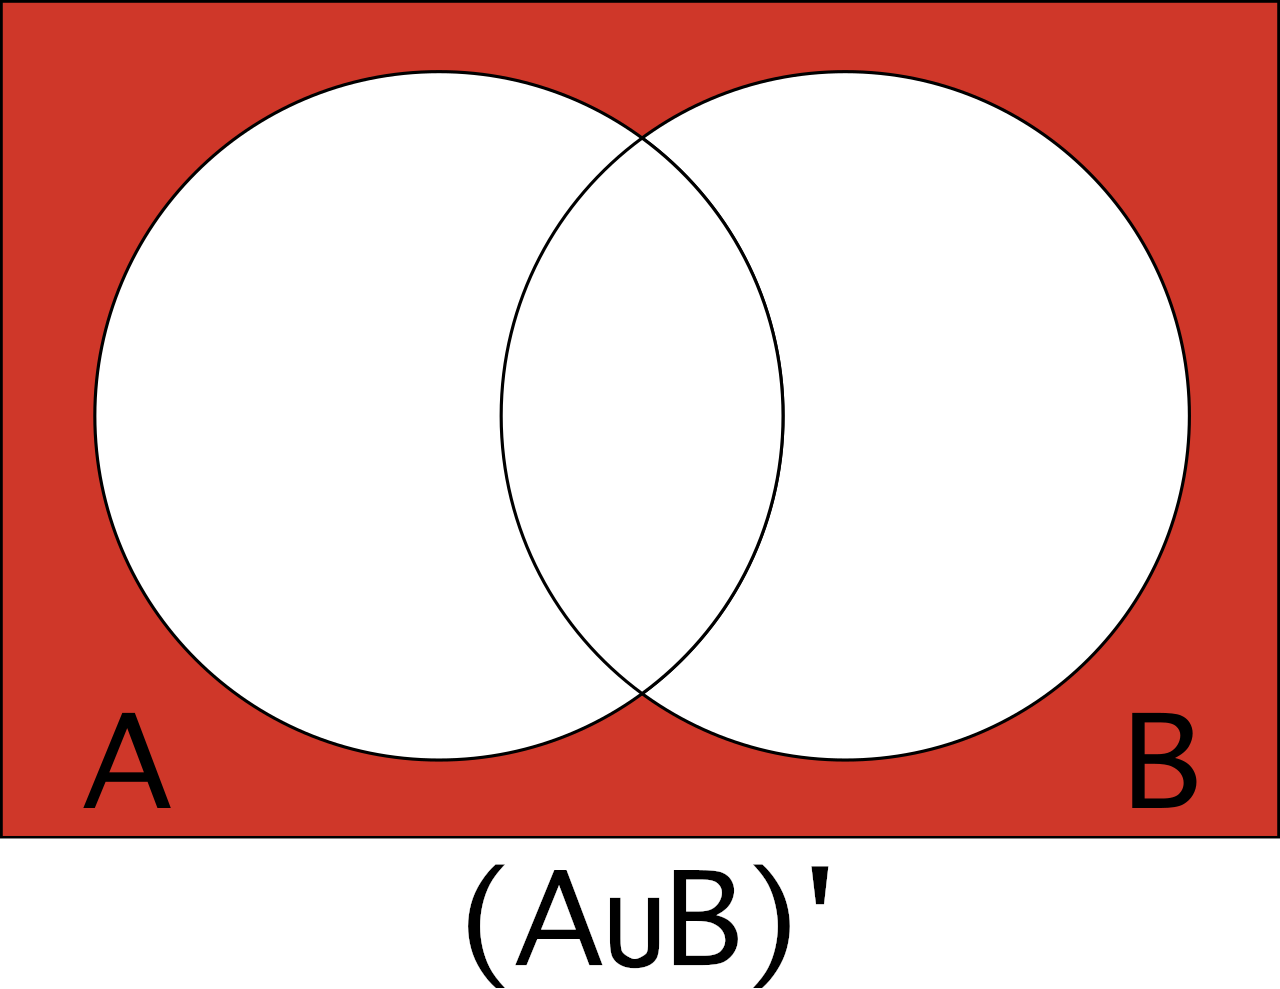 Venn diagram to help visualize the complement of A union B